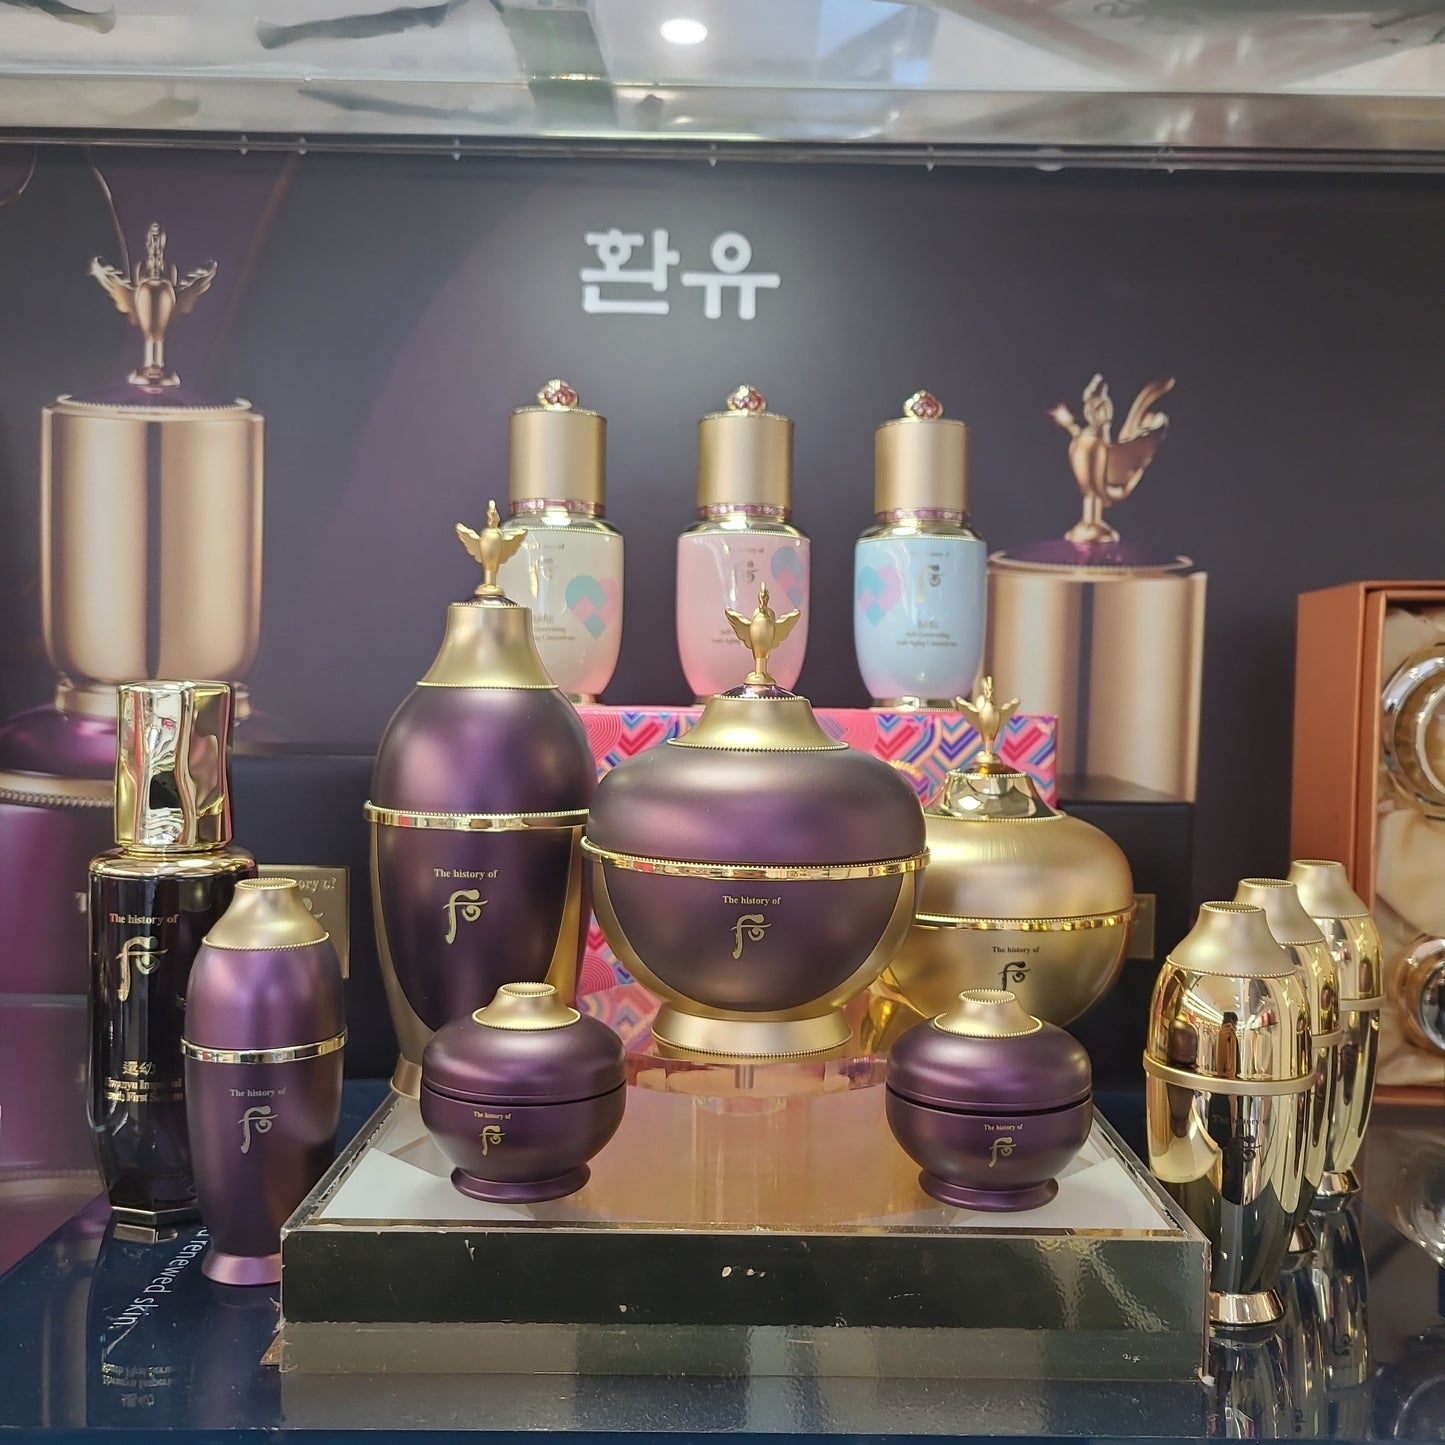 The History Of Whoo Hwanyu Imperial Full Set